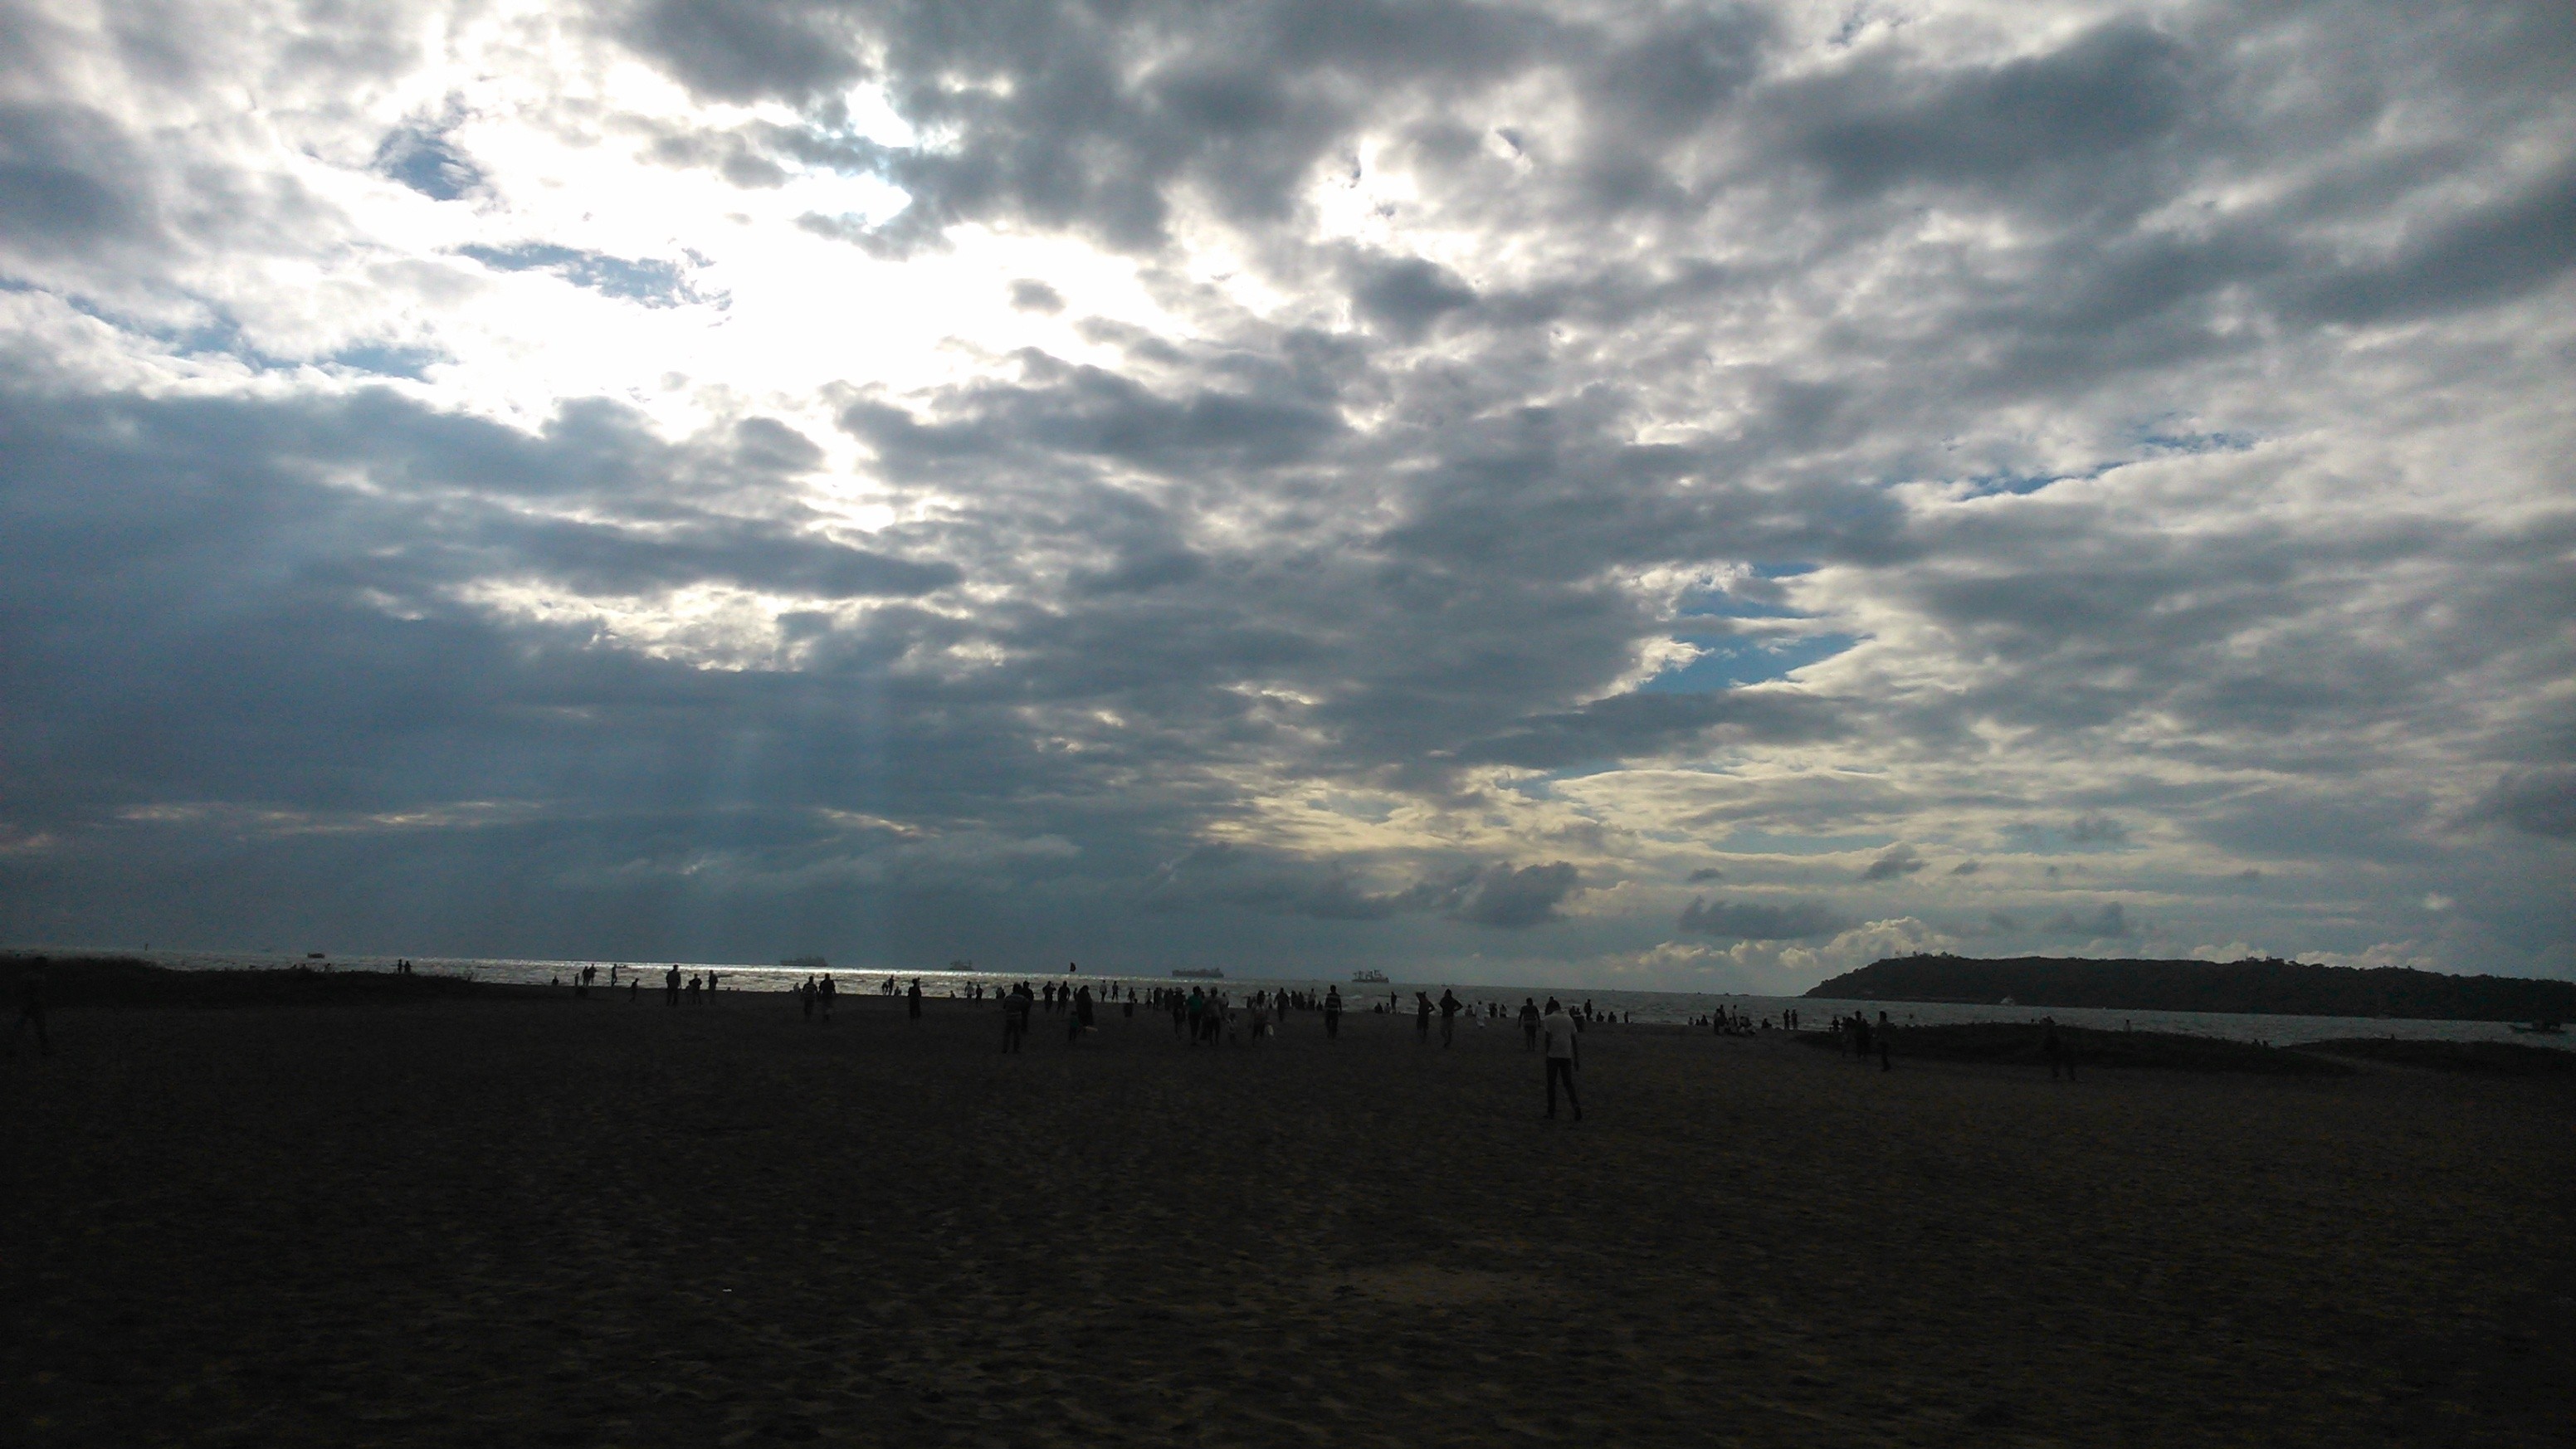 General 3104x1746 clouds people sunlight beach outdoors sky